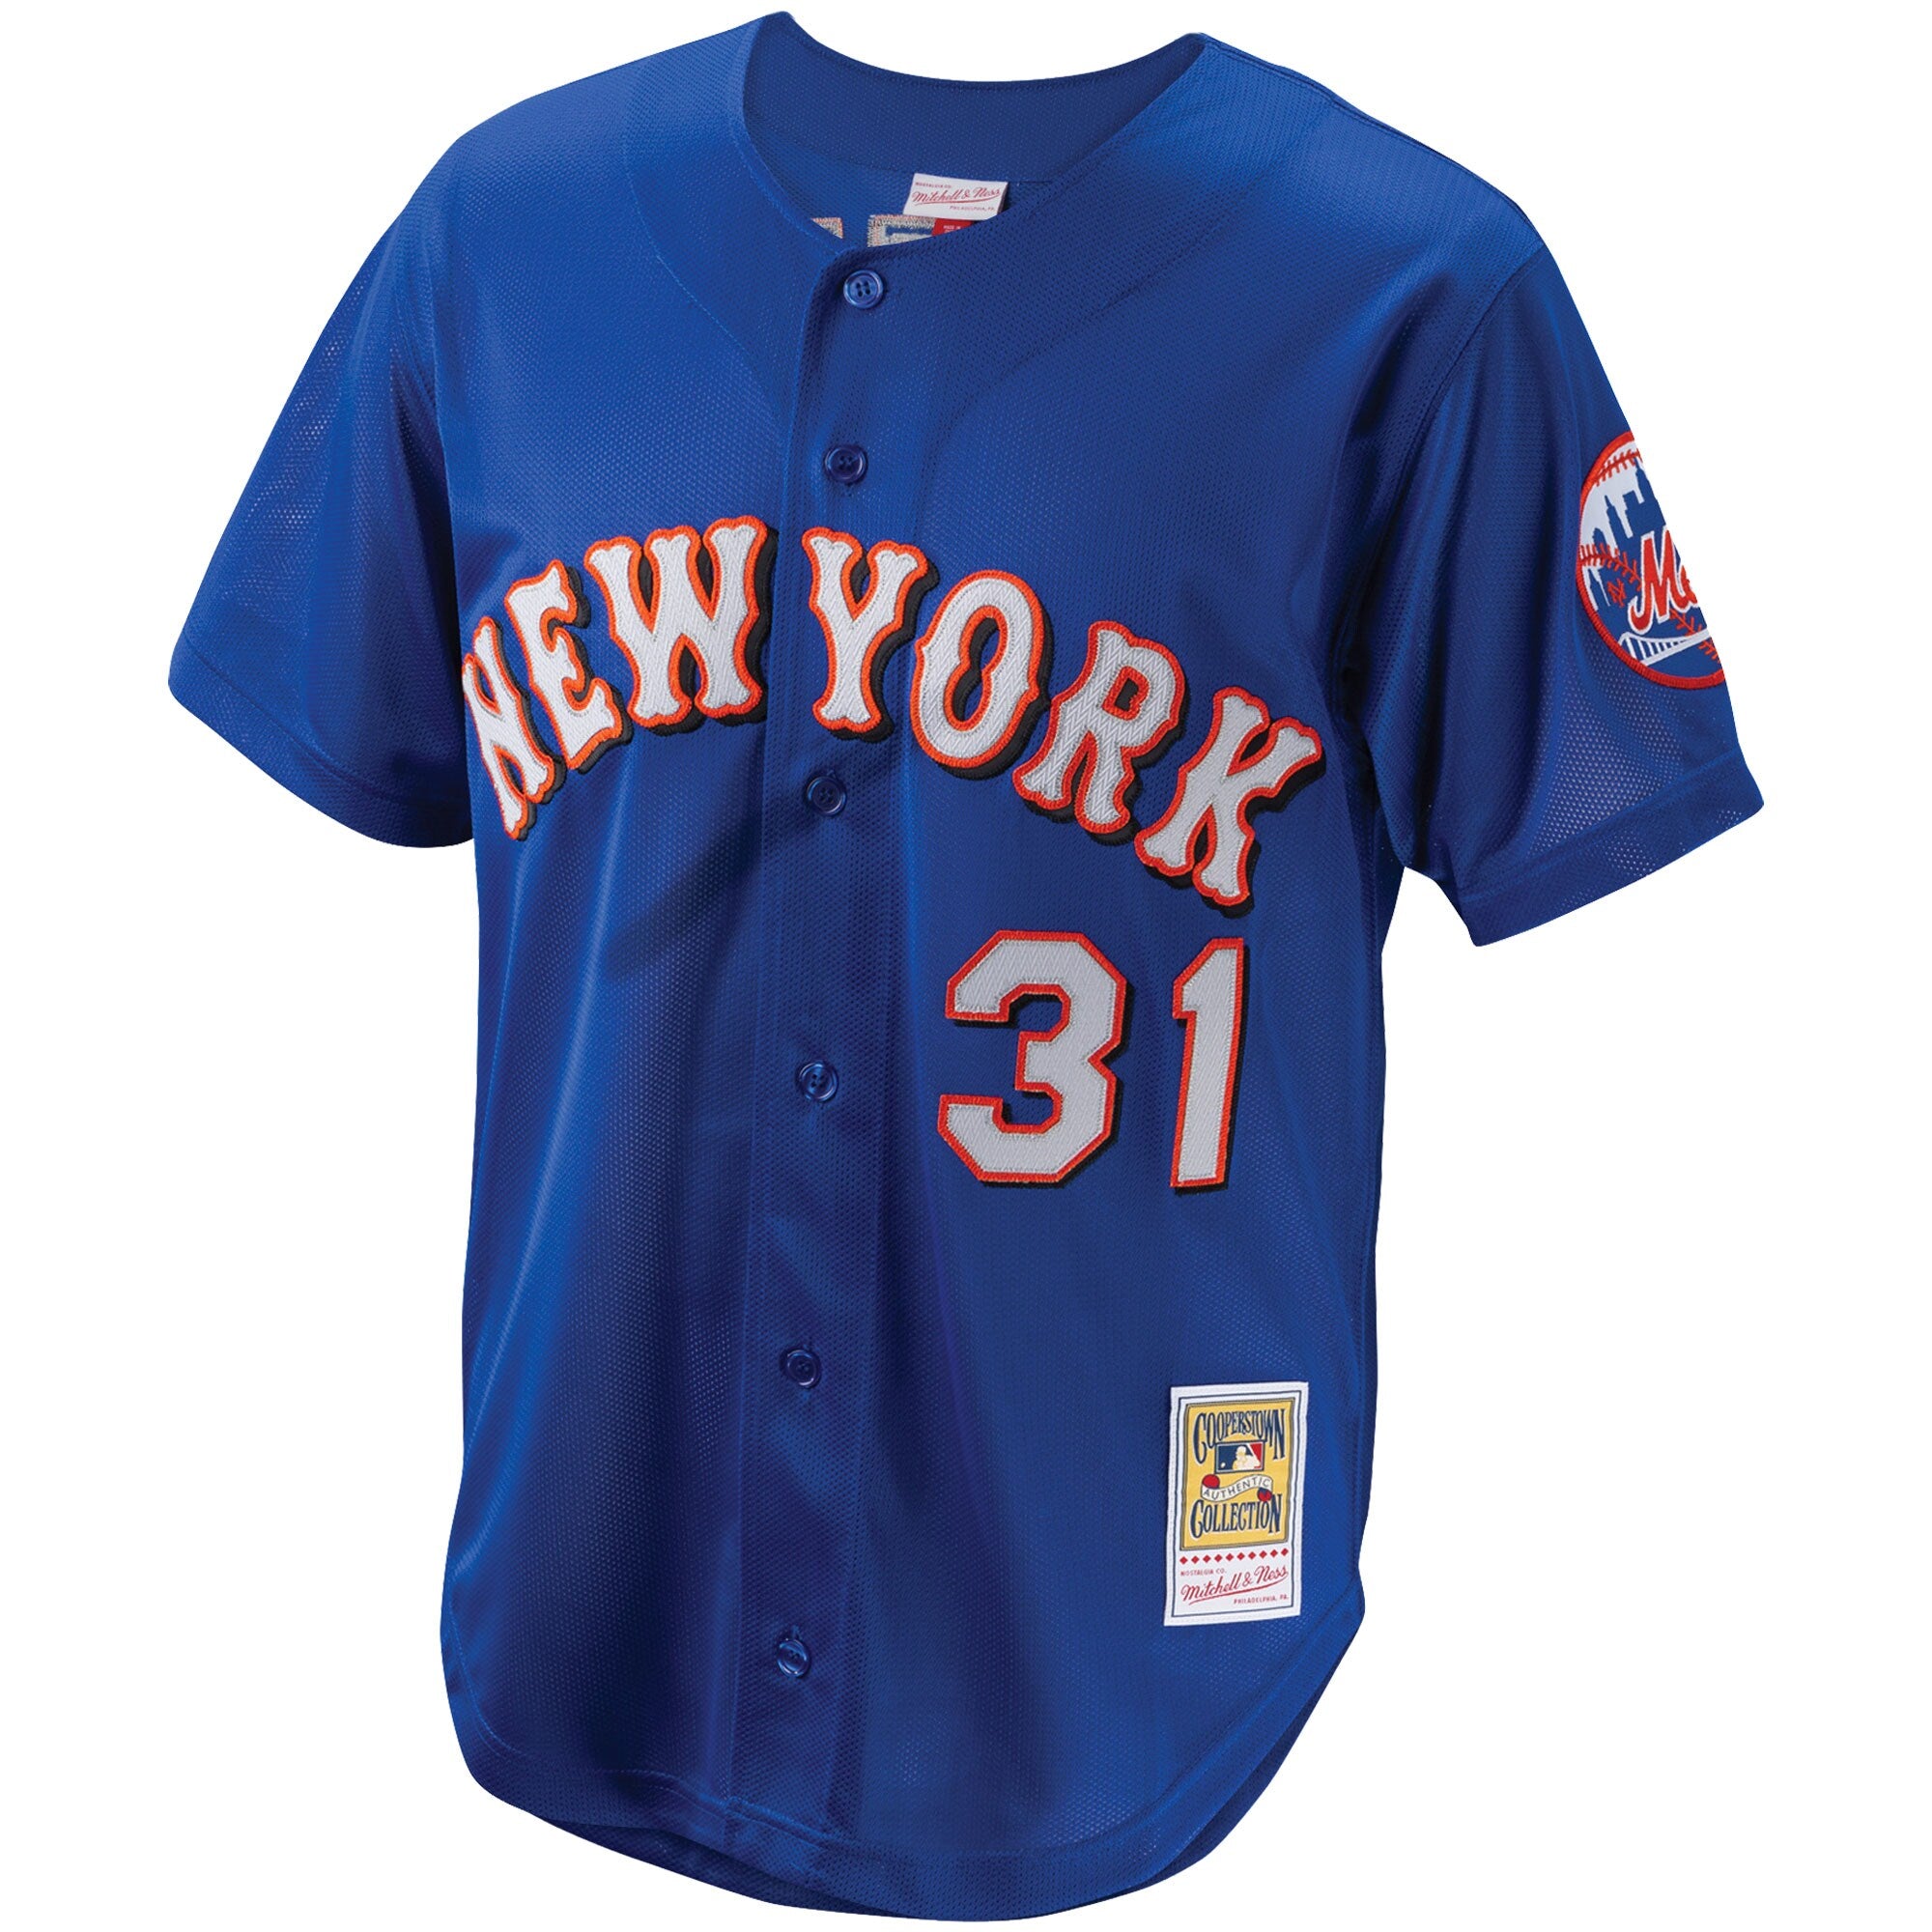  Mike Piazza Mets JERSEY Collection COLLECTORS PIN SOLD